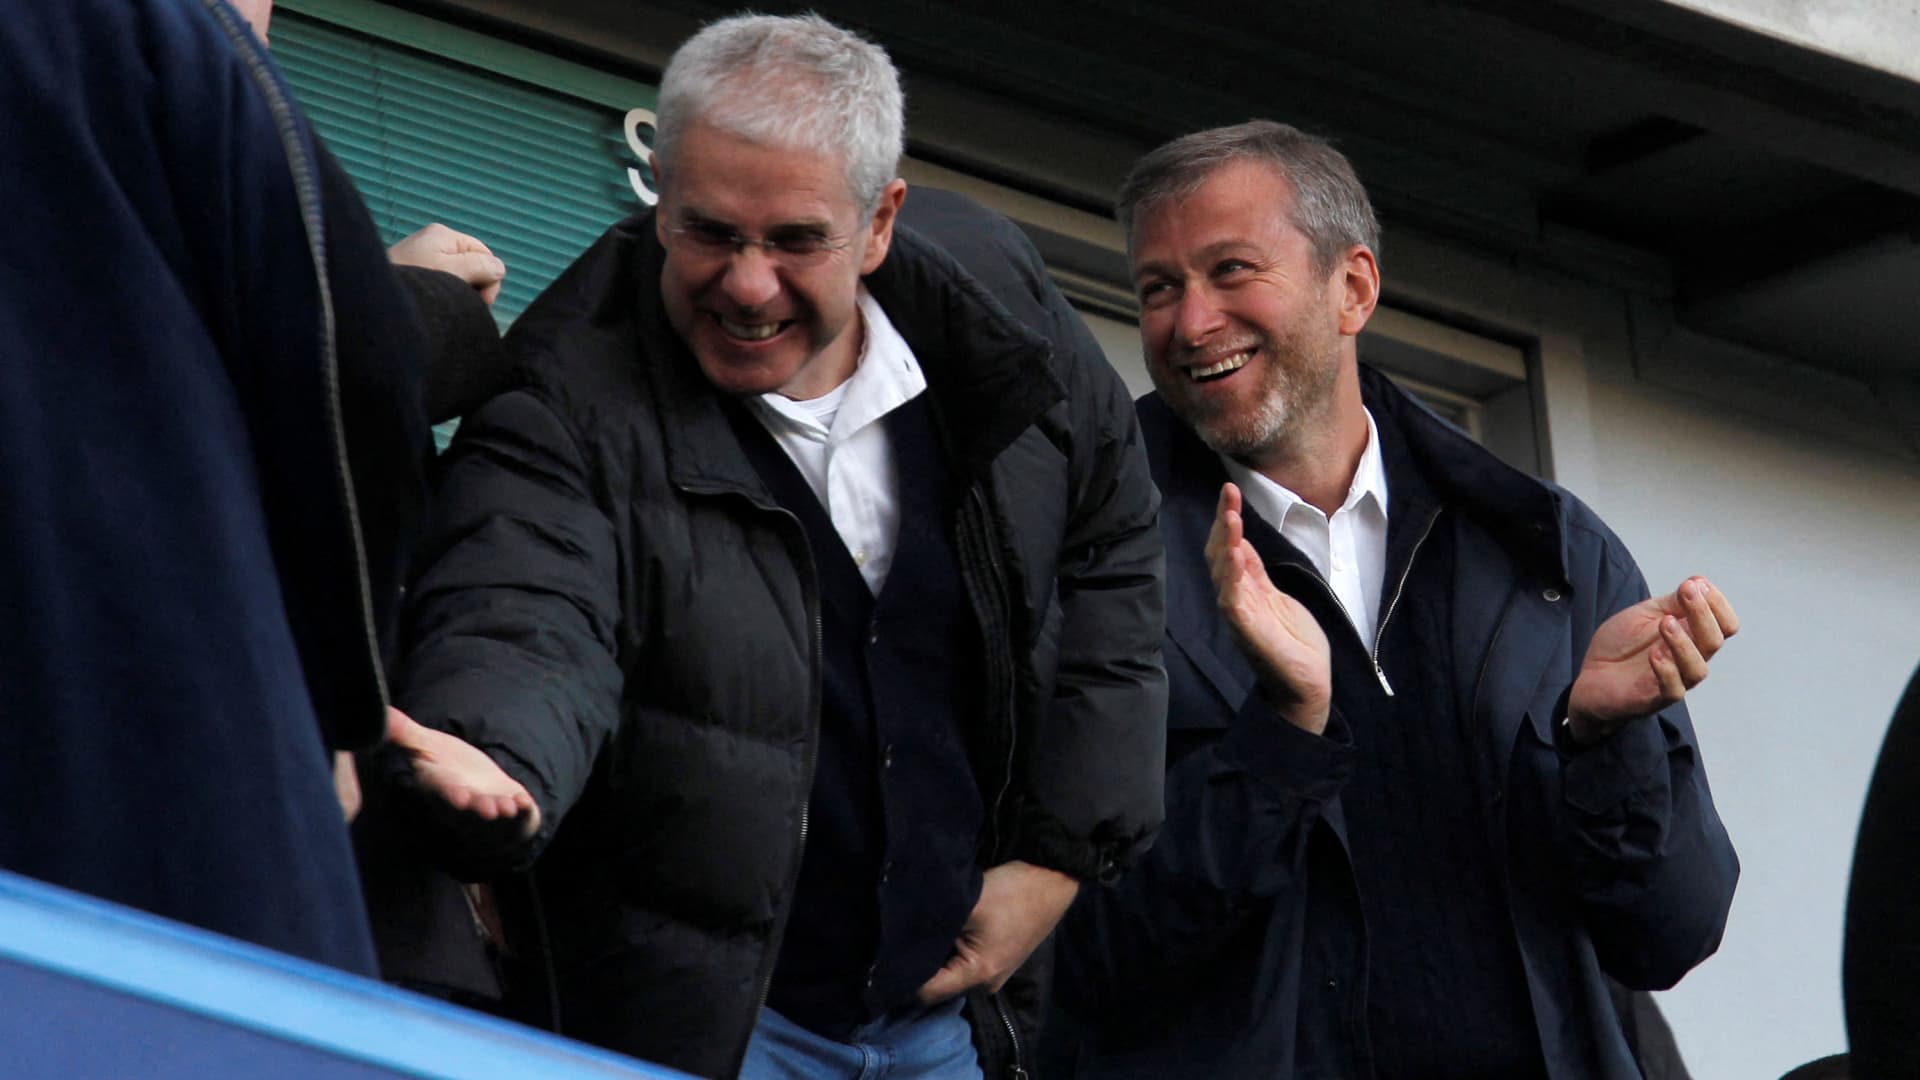 Chelsea owner Roman Abramovich (R) and director Eugene Tenenbaum (L) celebrate a goal for Chelsea v Bolton Wanderers in Barclays Premier League February 25, 2012.